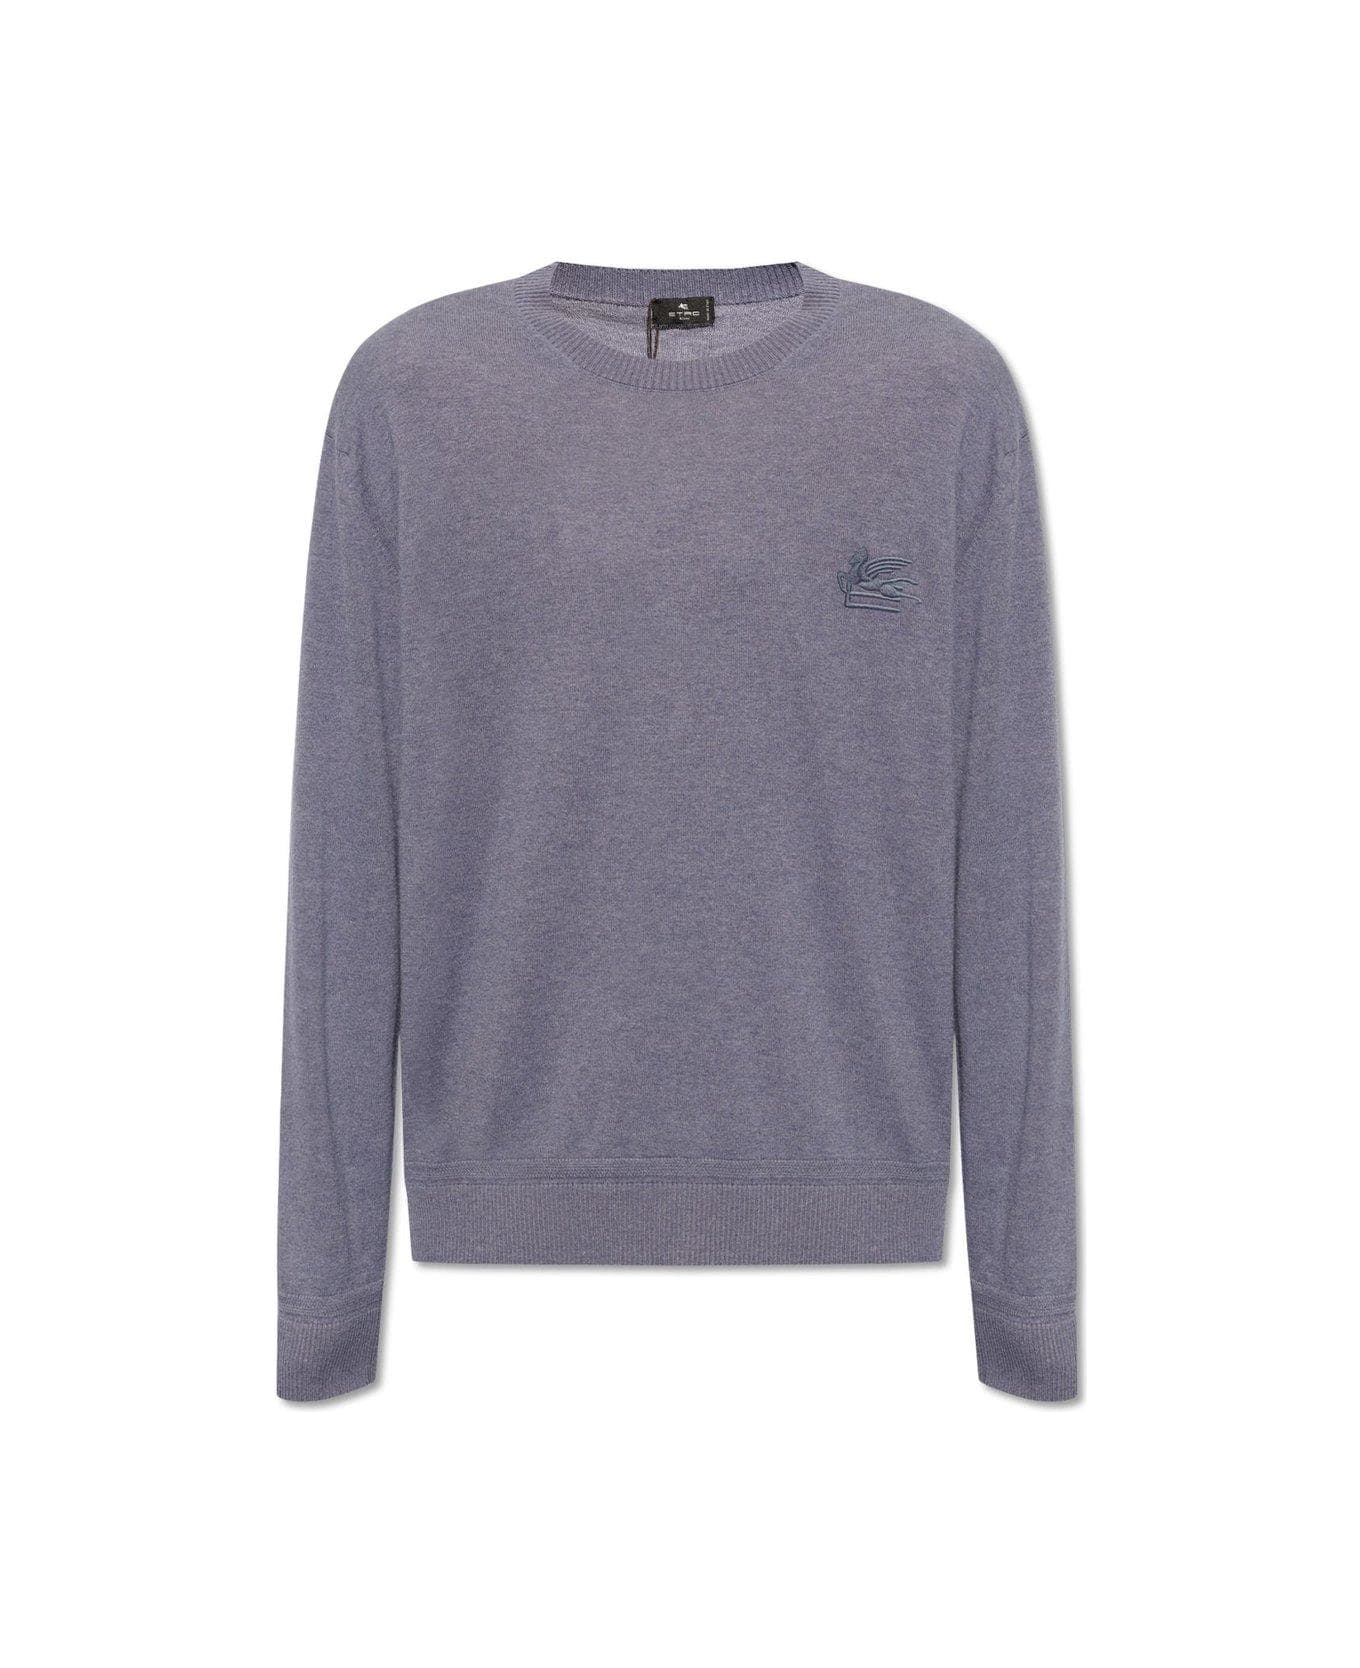 Etro Pegaso Embroidered Knit Jumper